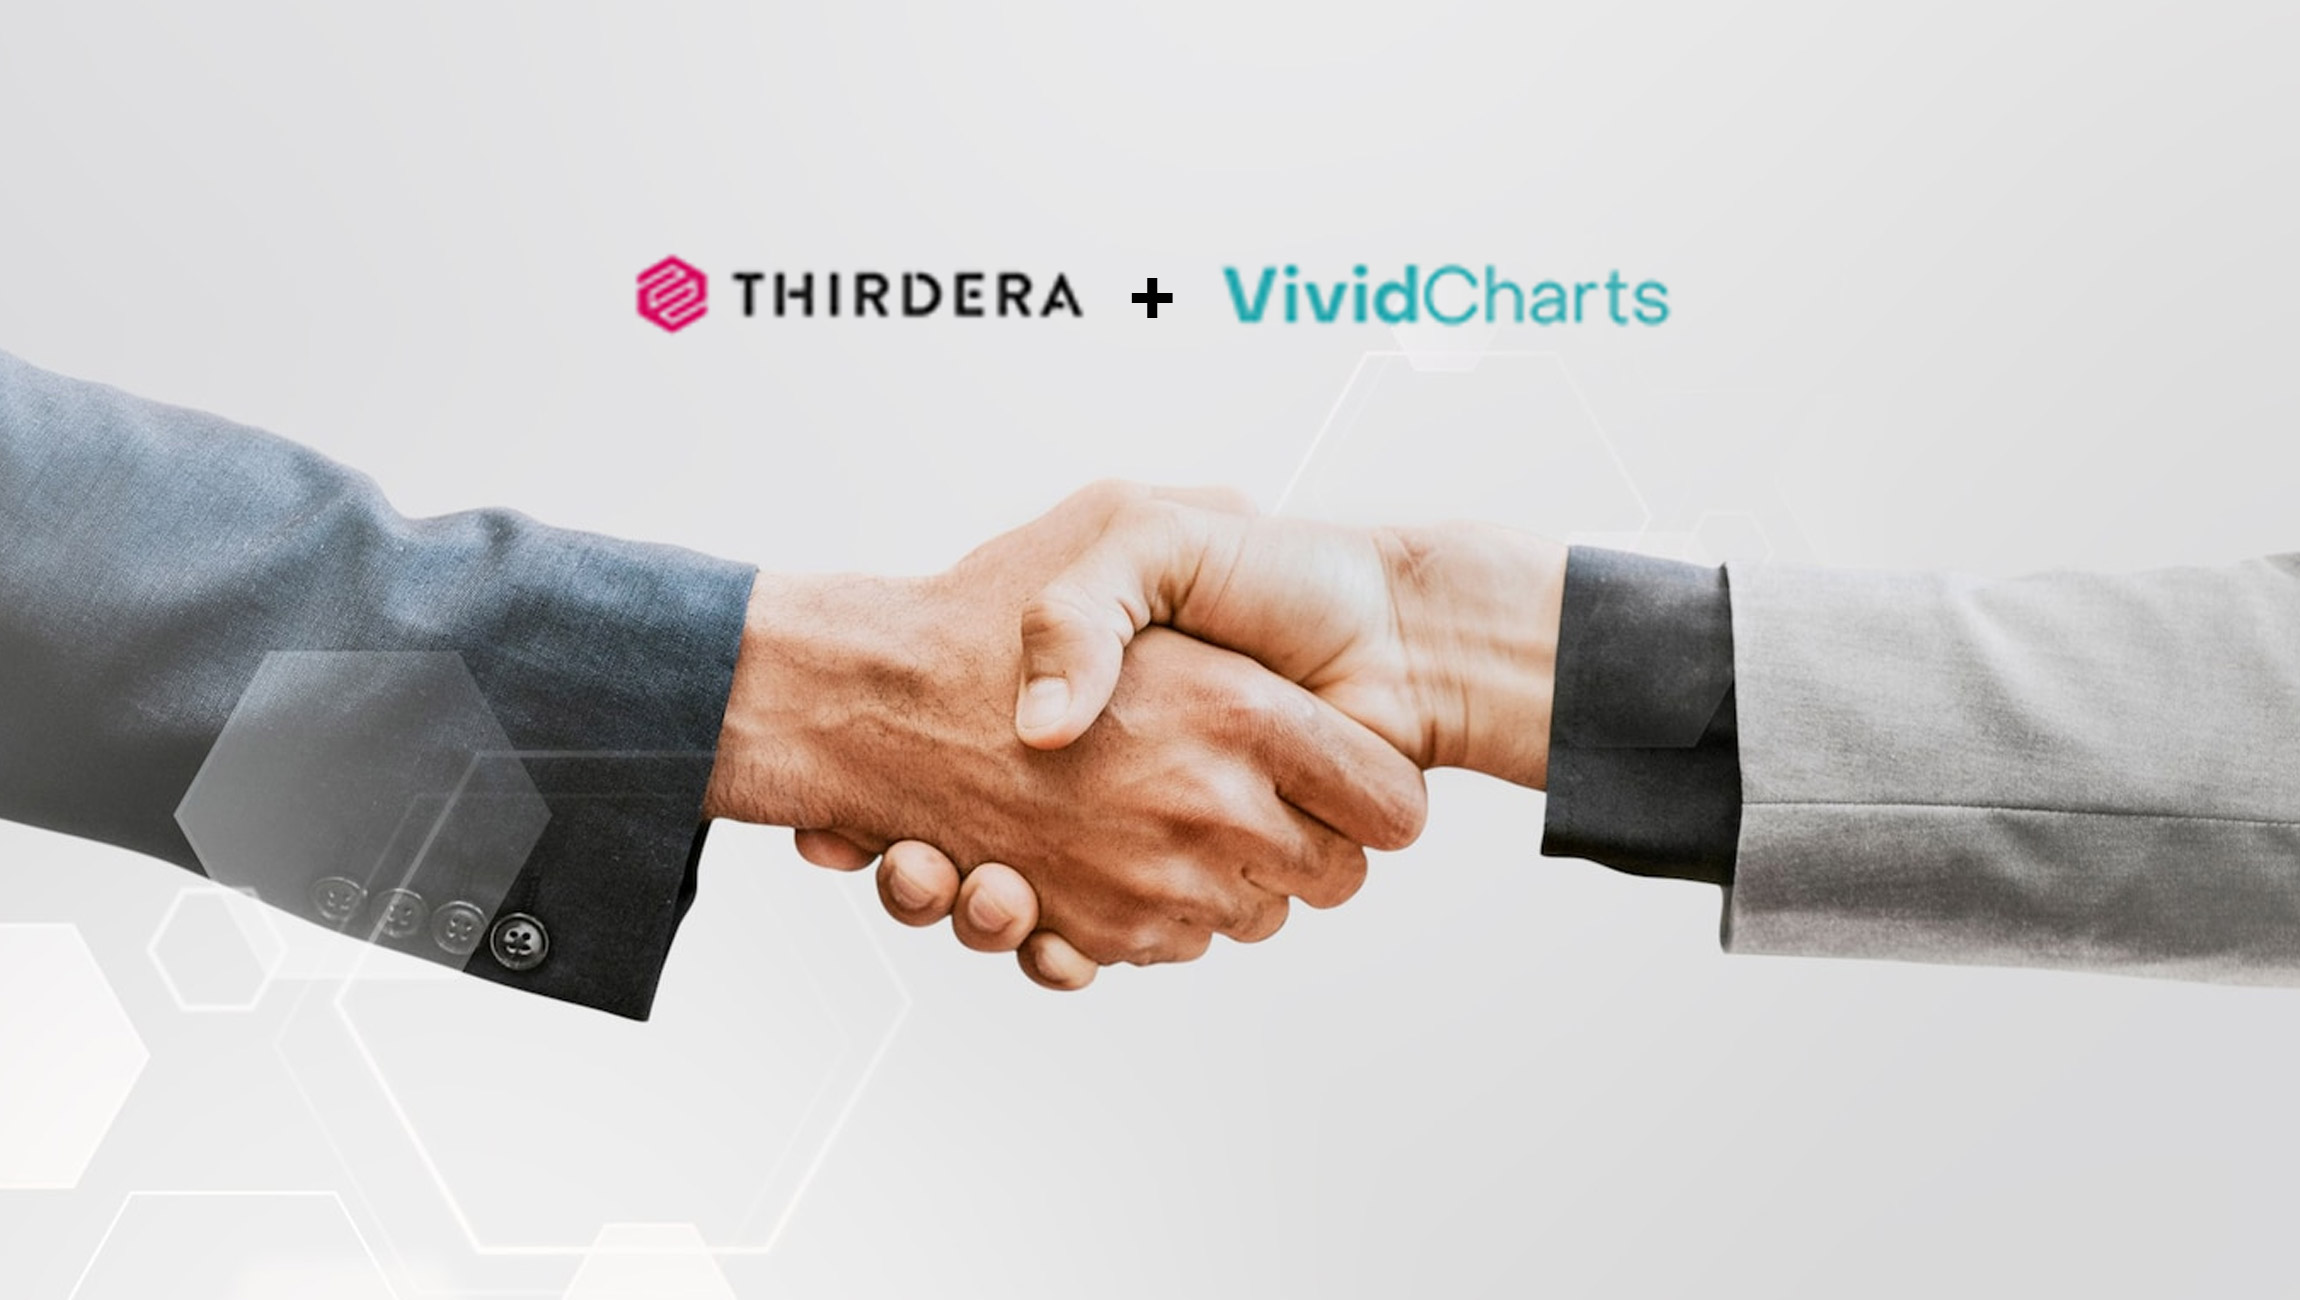 Thirdera and VividCharts Announce Partnership Focused On Creating Long Term Value for Servicenow Customers via Key Measurement and Reporting